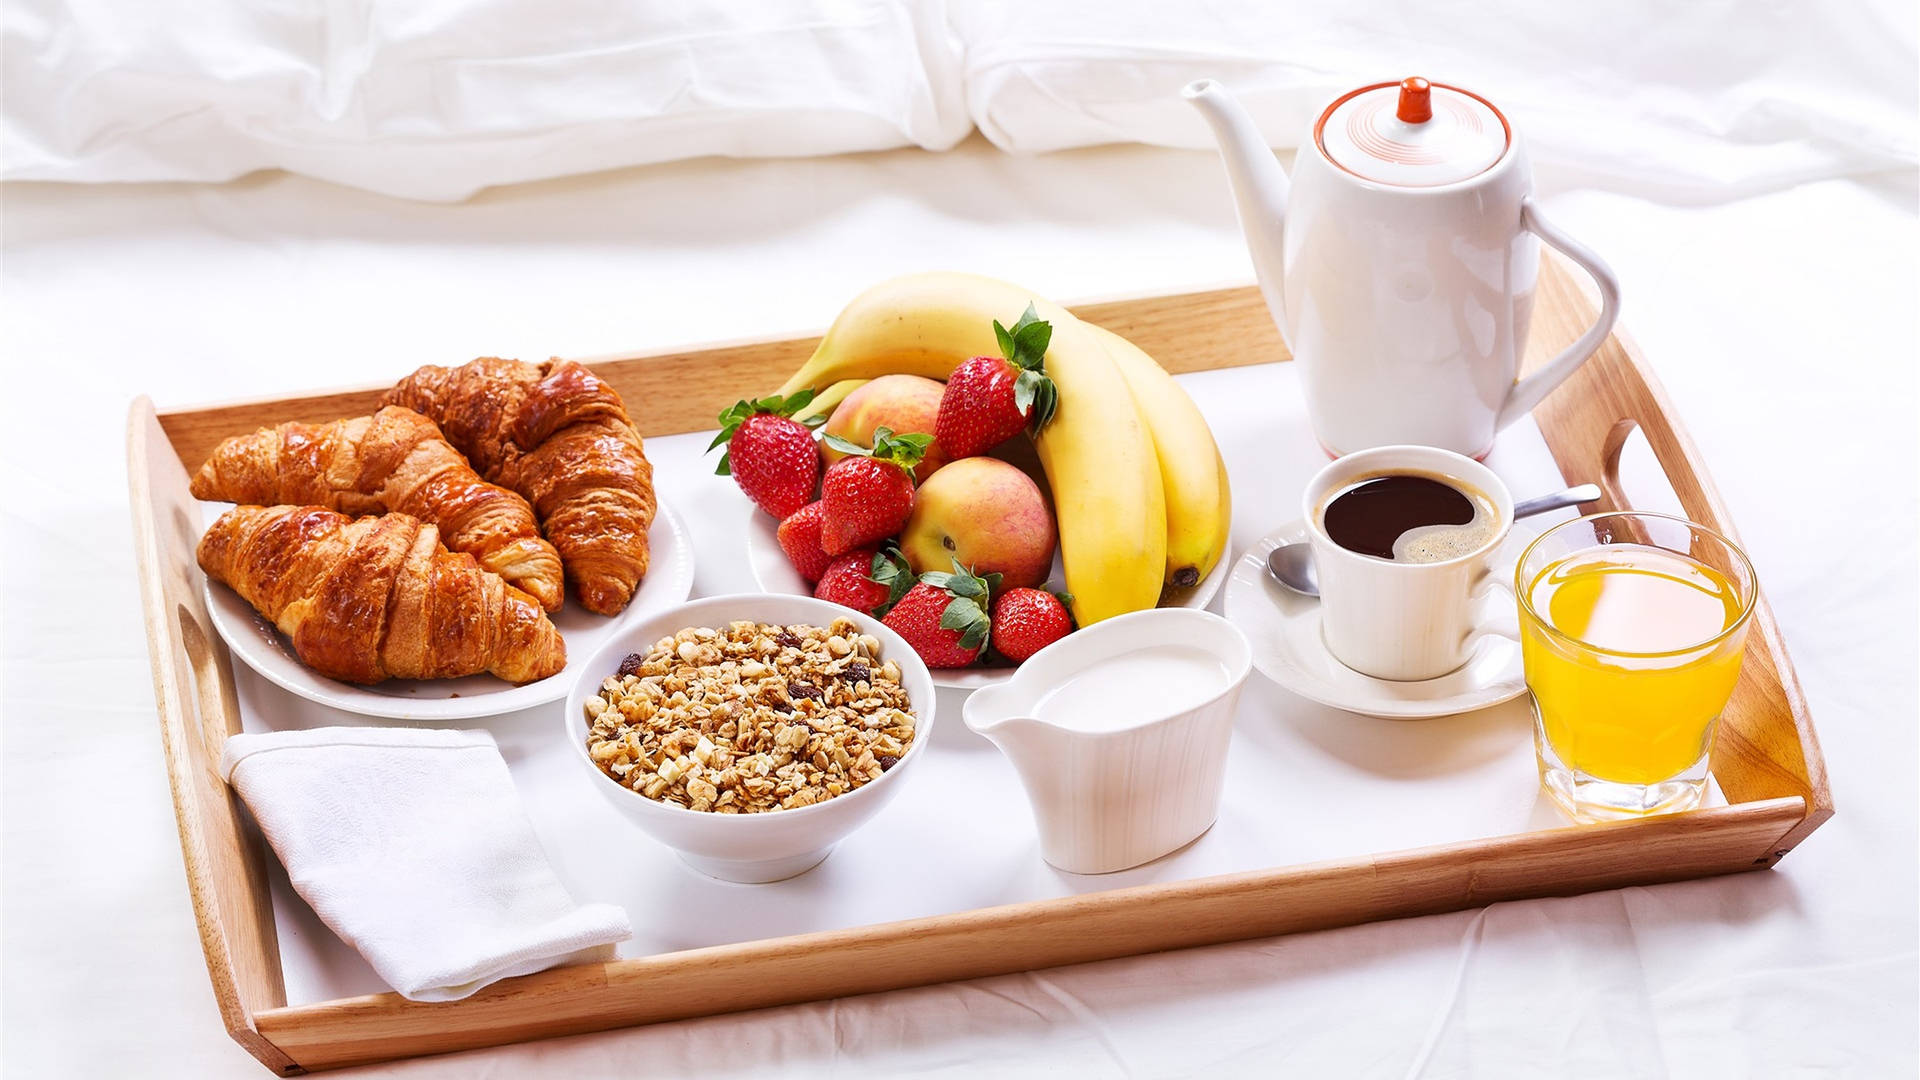 Healthy Breakfast Tray with Assortment of Goodness Wallpaper